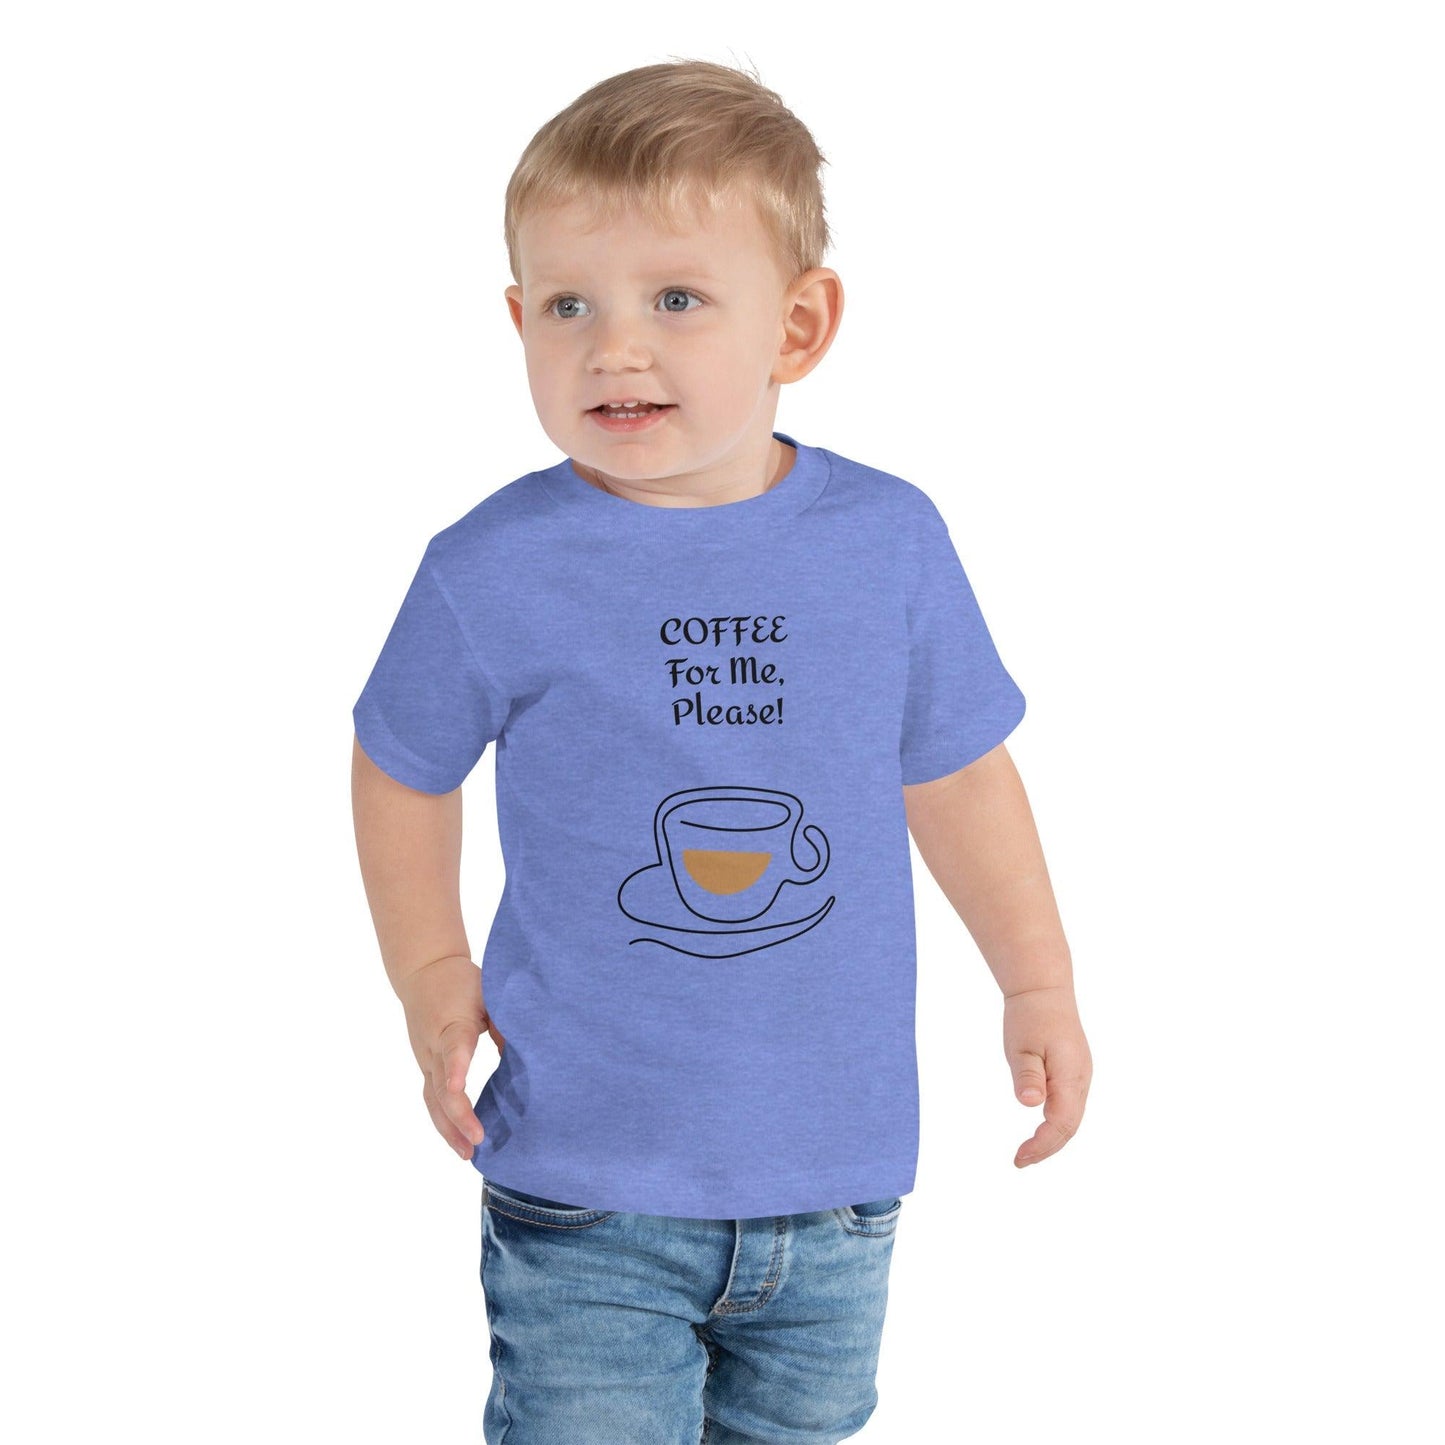 COFFEE For ME, Please! w/ a Cup and Saucer Toddler Short Sleeve Tee - Lizard Vigilante